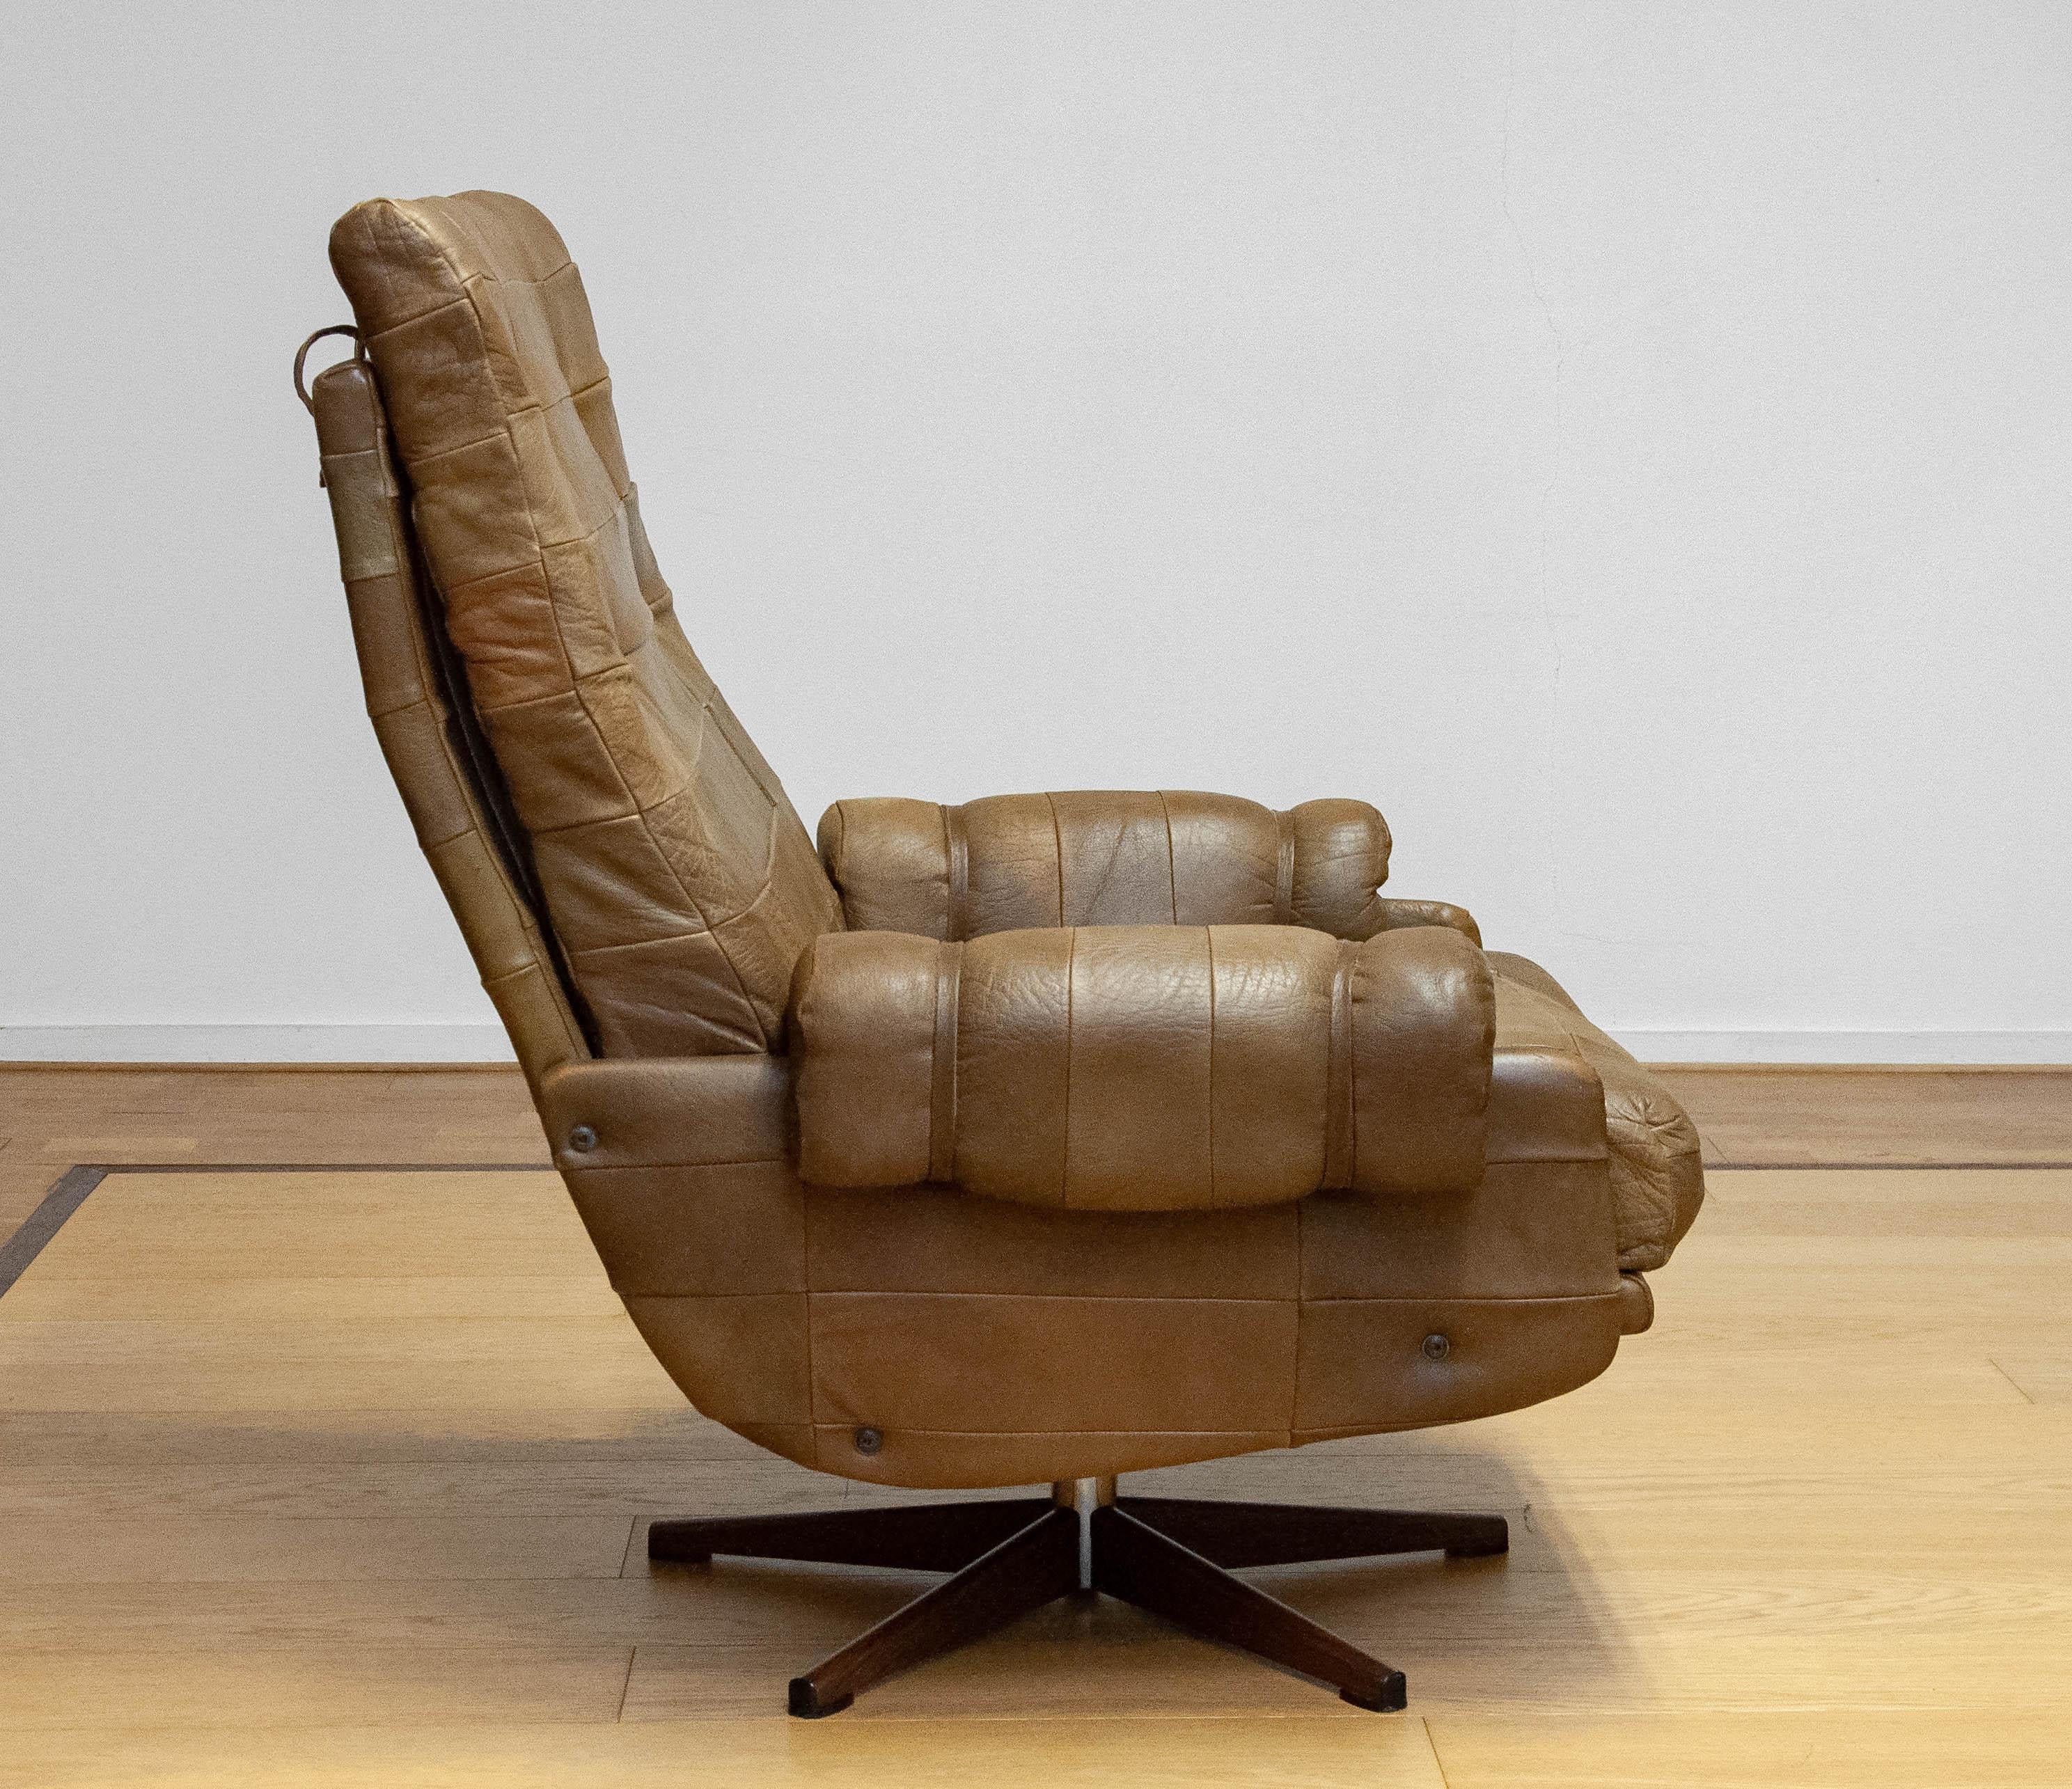 Swedish 70s Swivel Chair By Arne Norell Möbel AB In Sturdy Olive Green Buffalo Leather